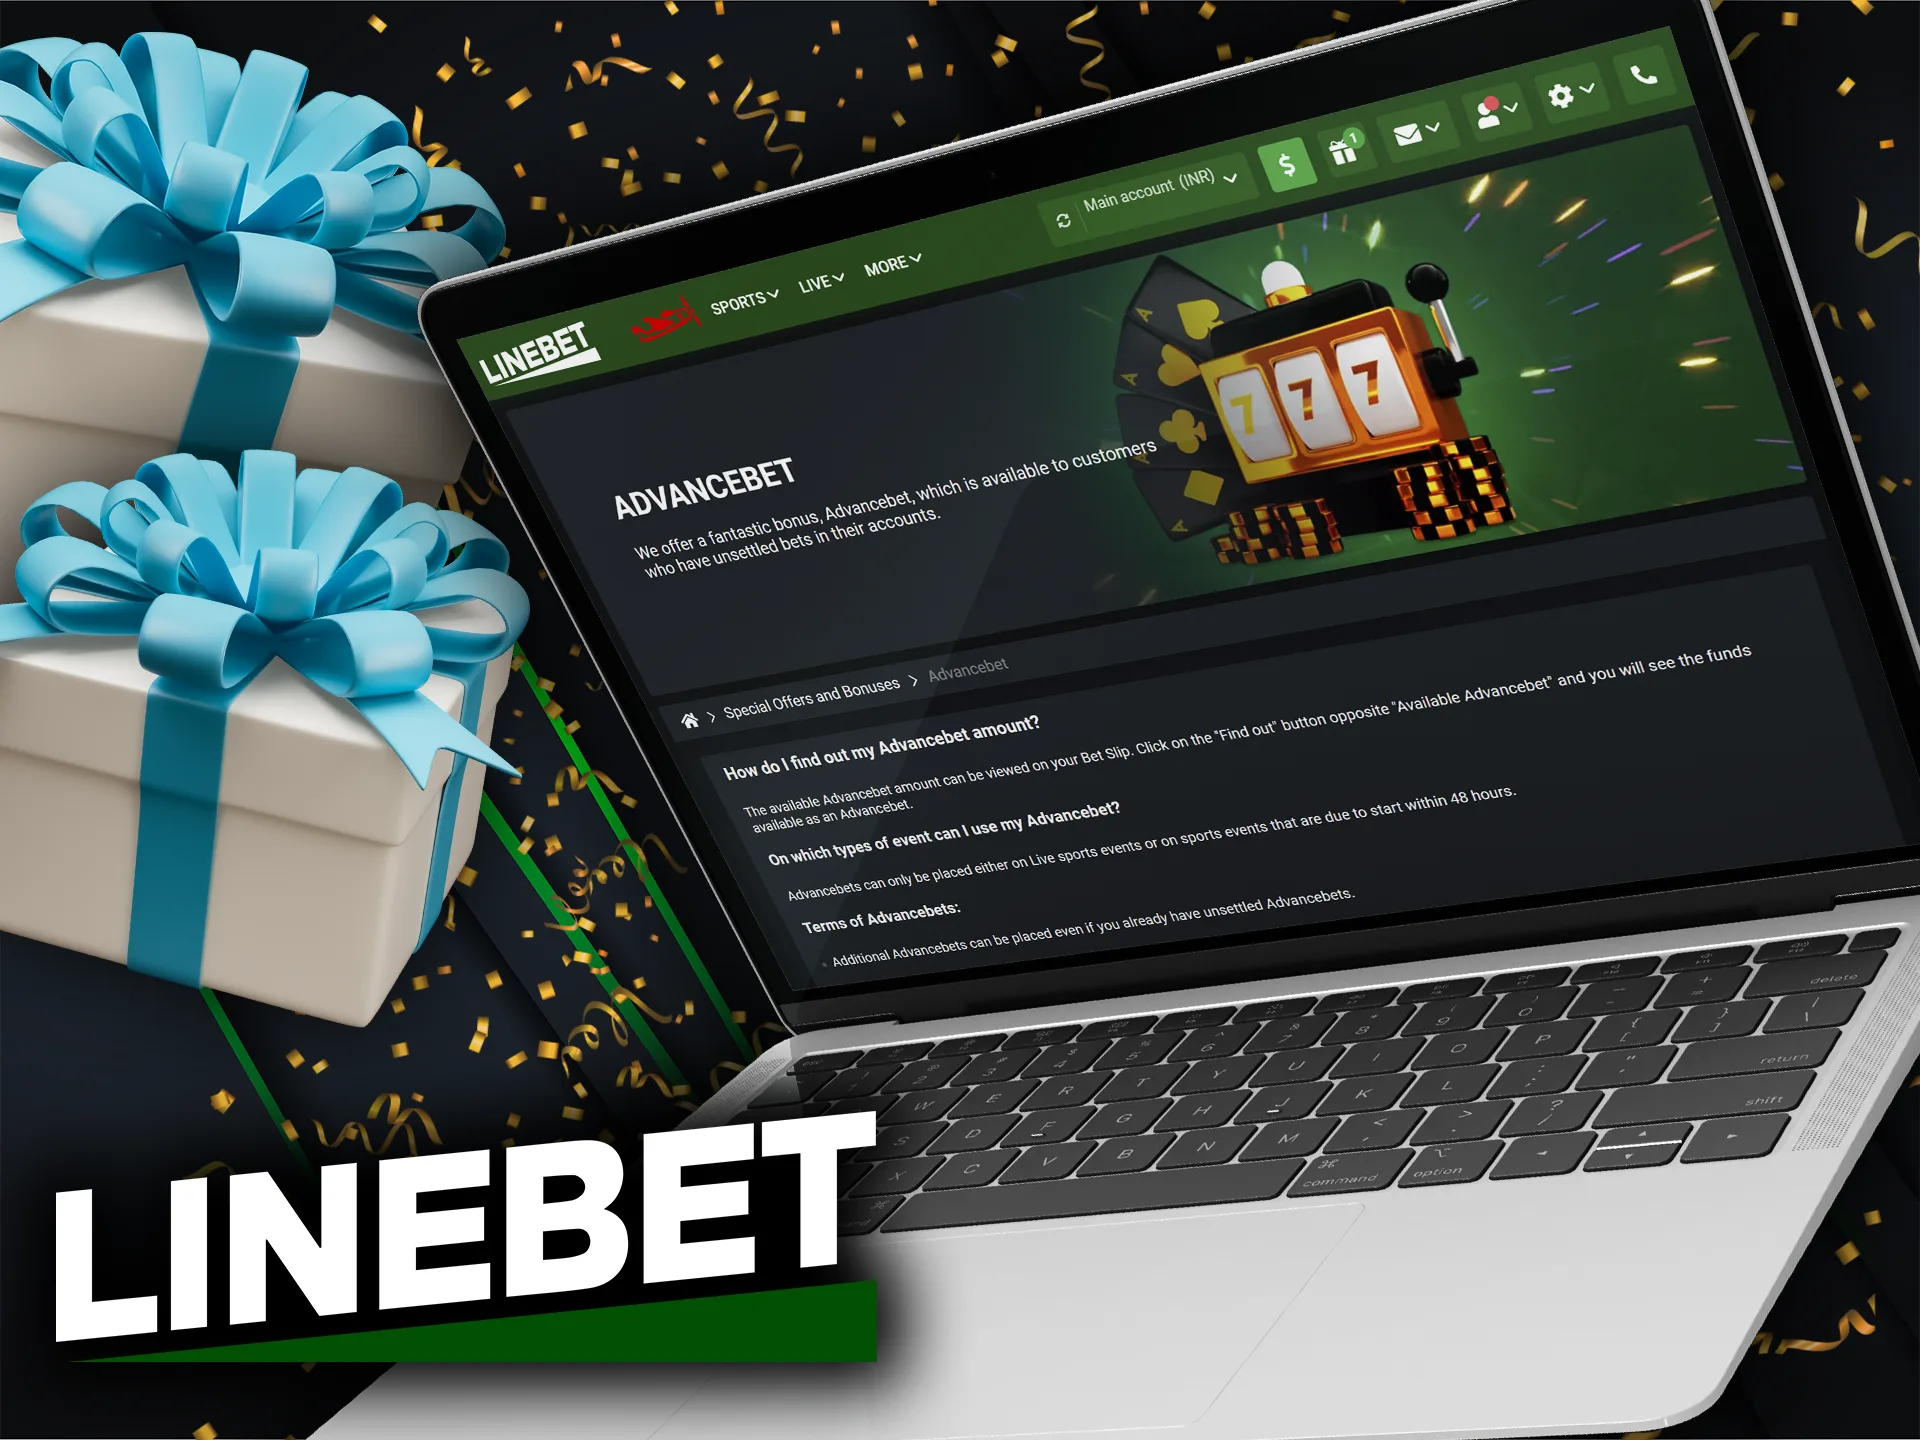 Get a Linebet advance and bet on sporting events.